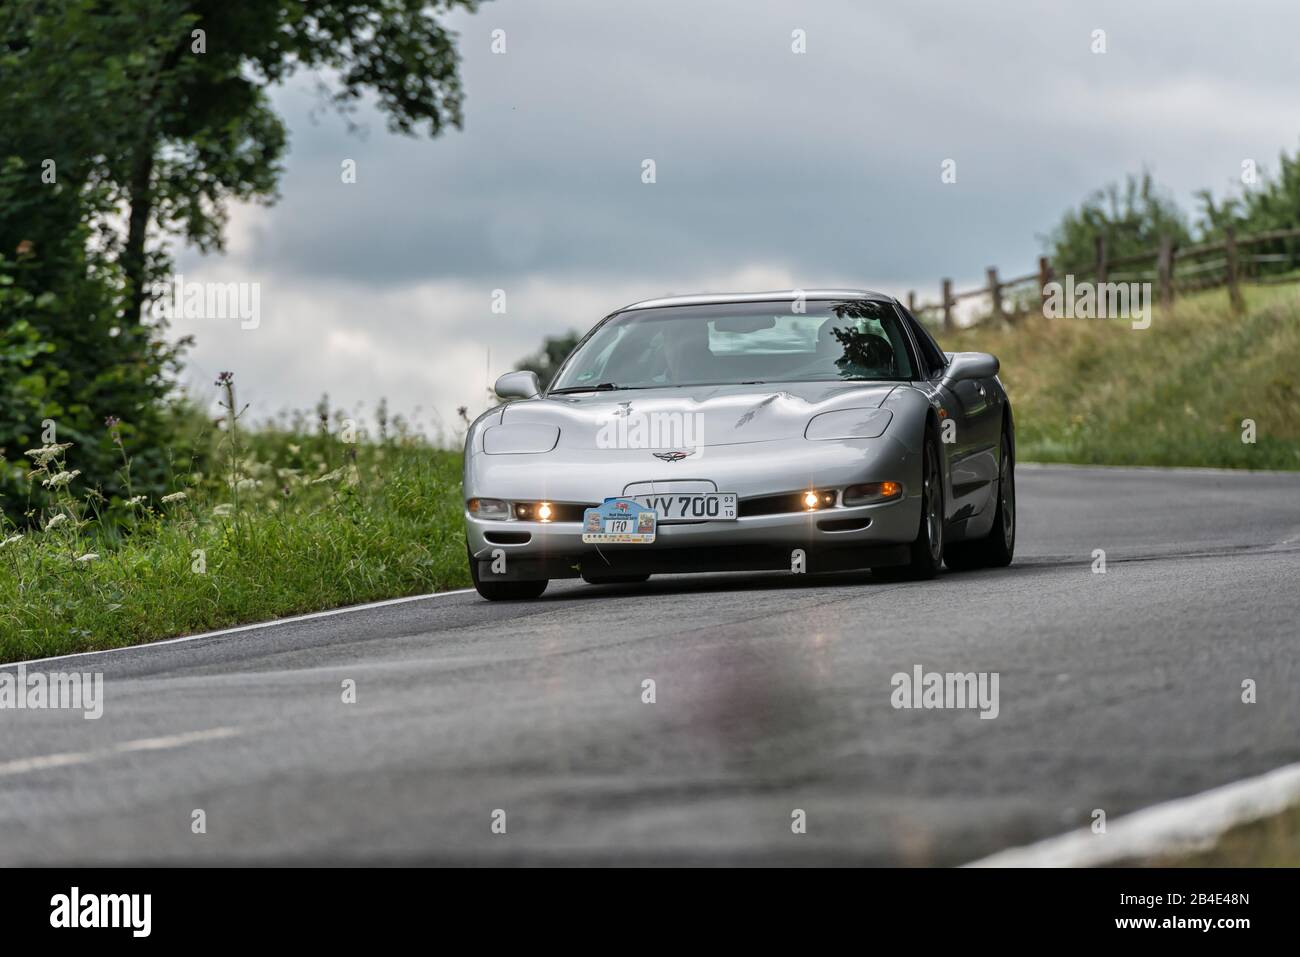 Bad König, Hesse, Germany, Chevrolet Corvette C4, built in 2002, 5.7 liter displacement, 303 KW at the classic festival. Stock Photo